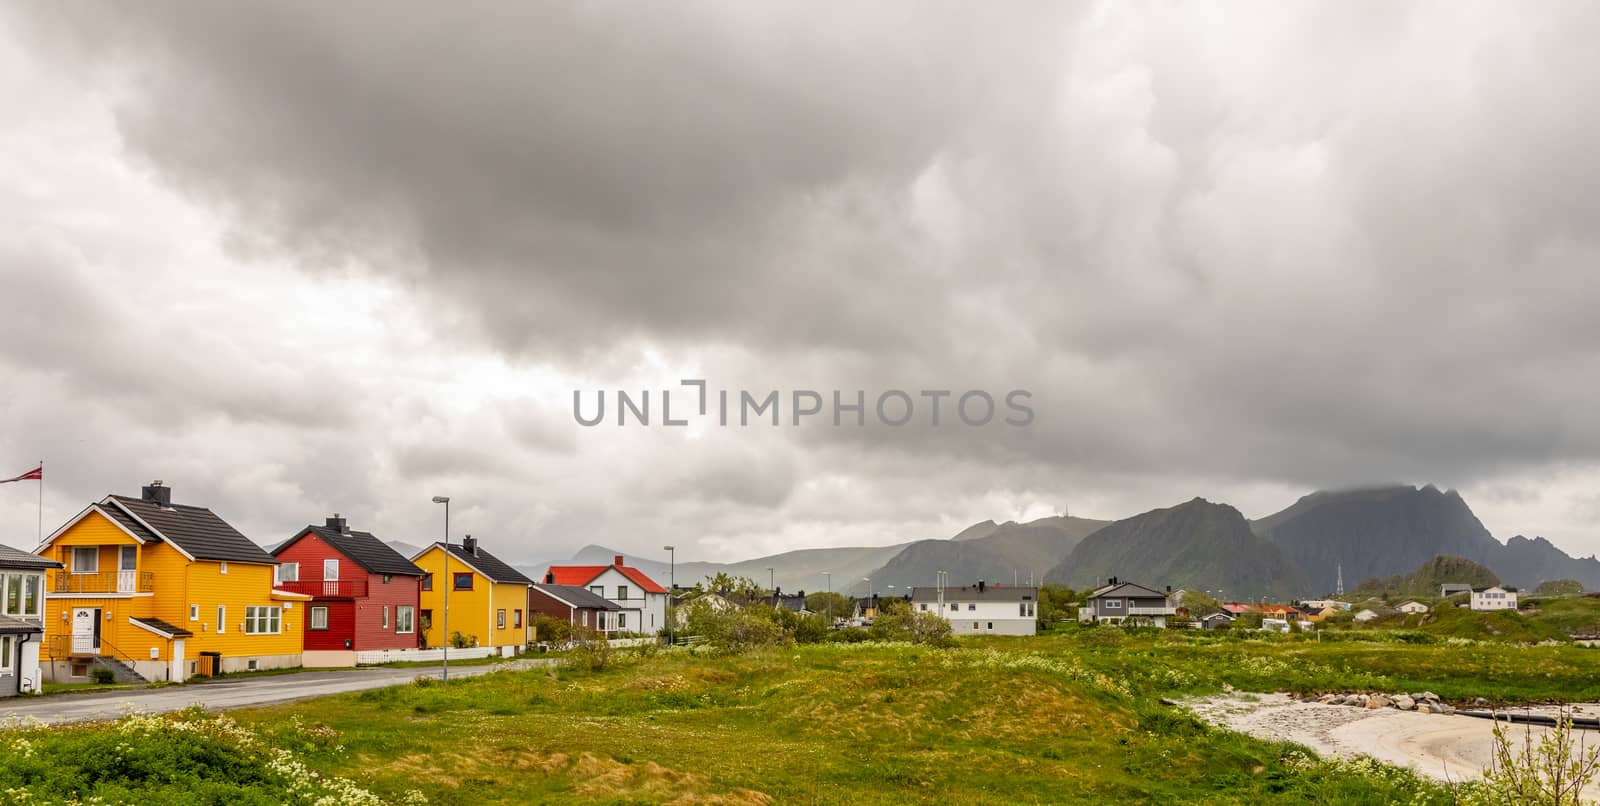 Yellow, red and white norwegian houses along the road in Andenes village, Andoy Municipality, Vesteralen district, Nordland county, Norway